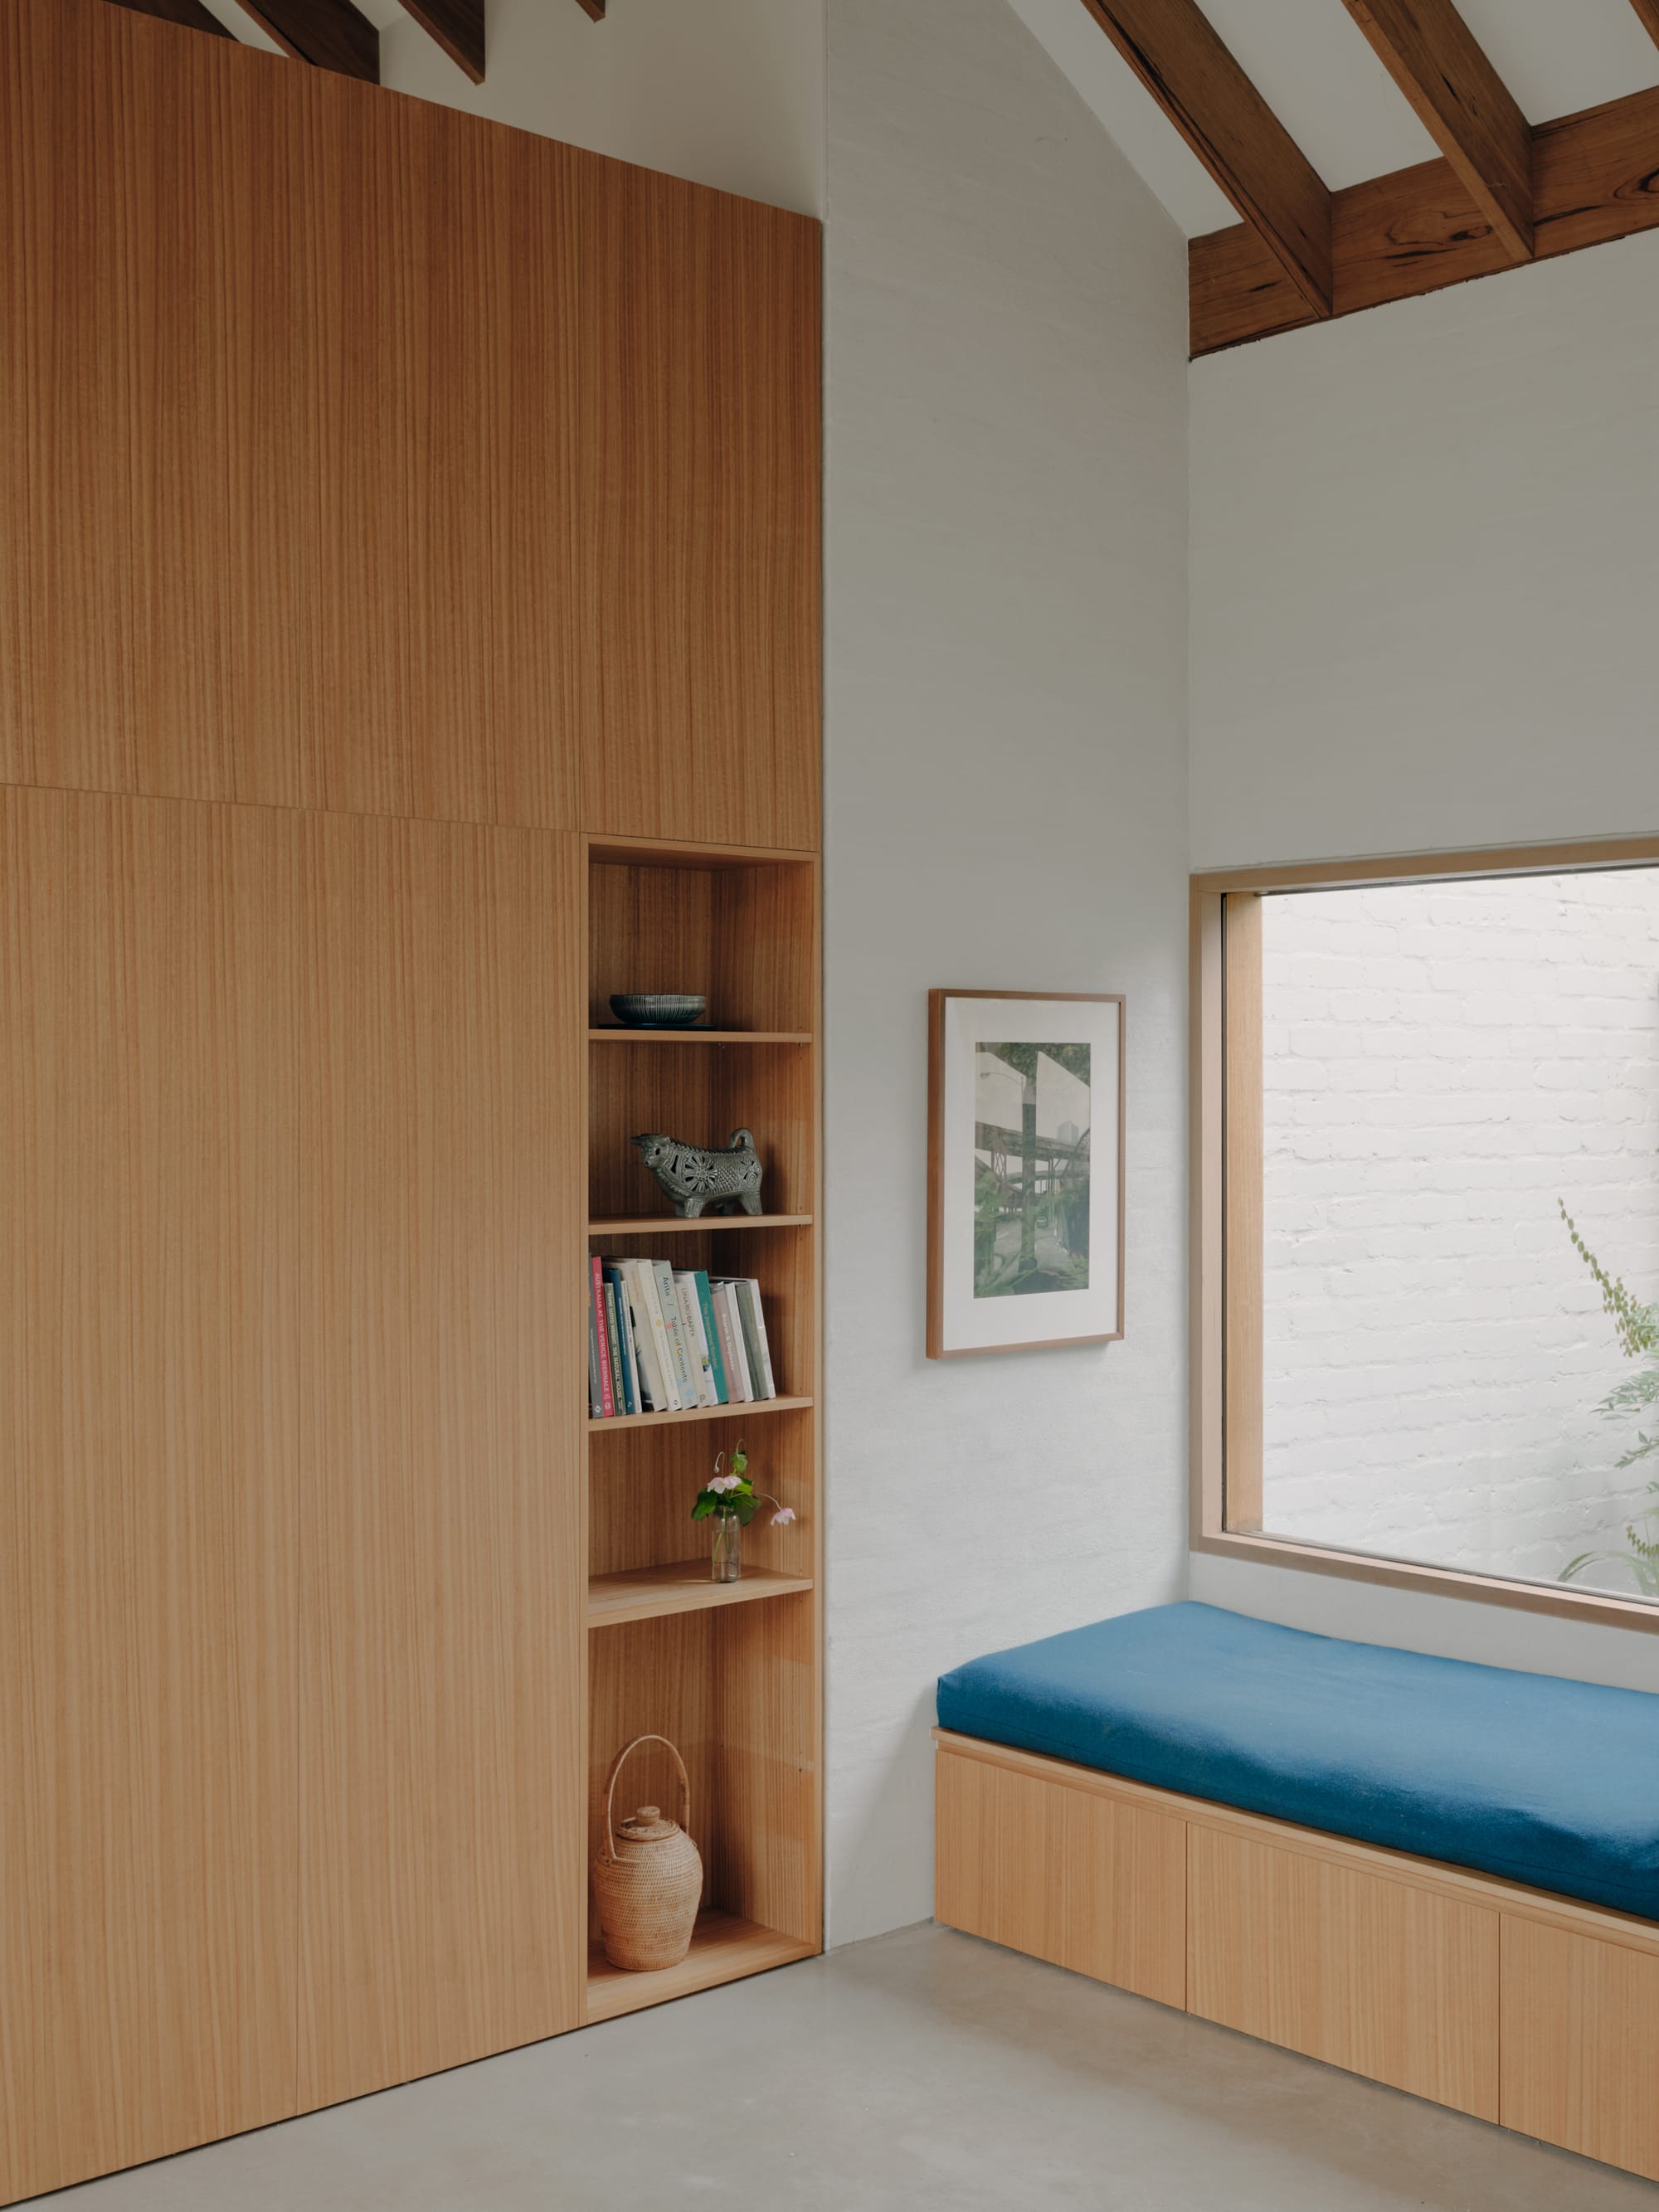 Corymbia by Karen Abernethy Architects. Photography by Tom Ross. Timber floor-to-ceiling storage on left wall and timber bench seat with blue cushion underneath window on the right. 